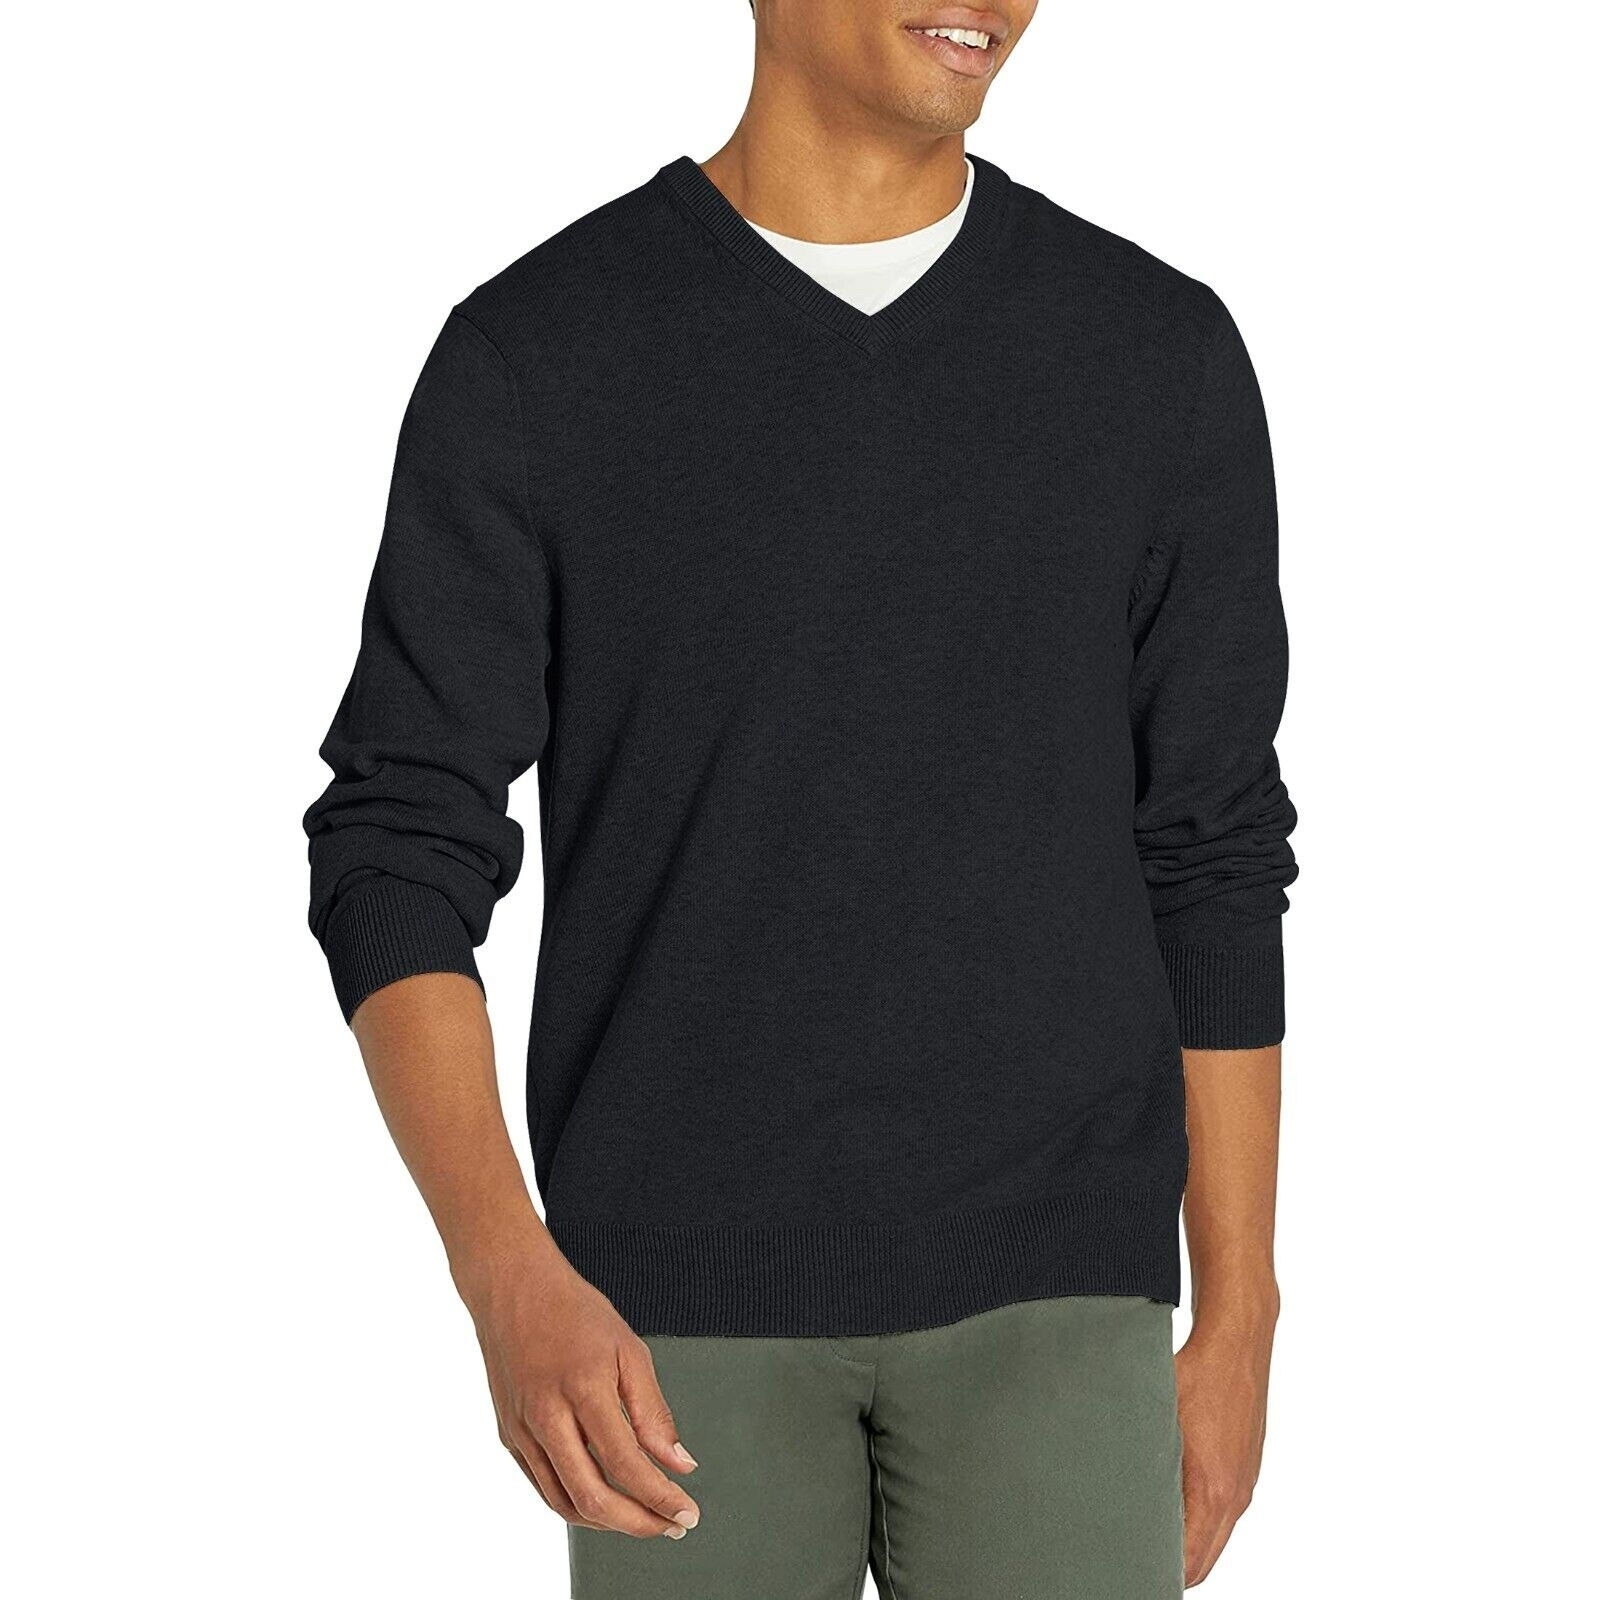 Men's Casual Ultra-Soft Slim Fit Warm Knit Pullover V-Neck Sweater For Winter - Black, XX-Large